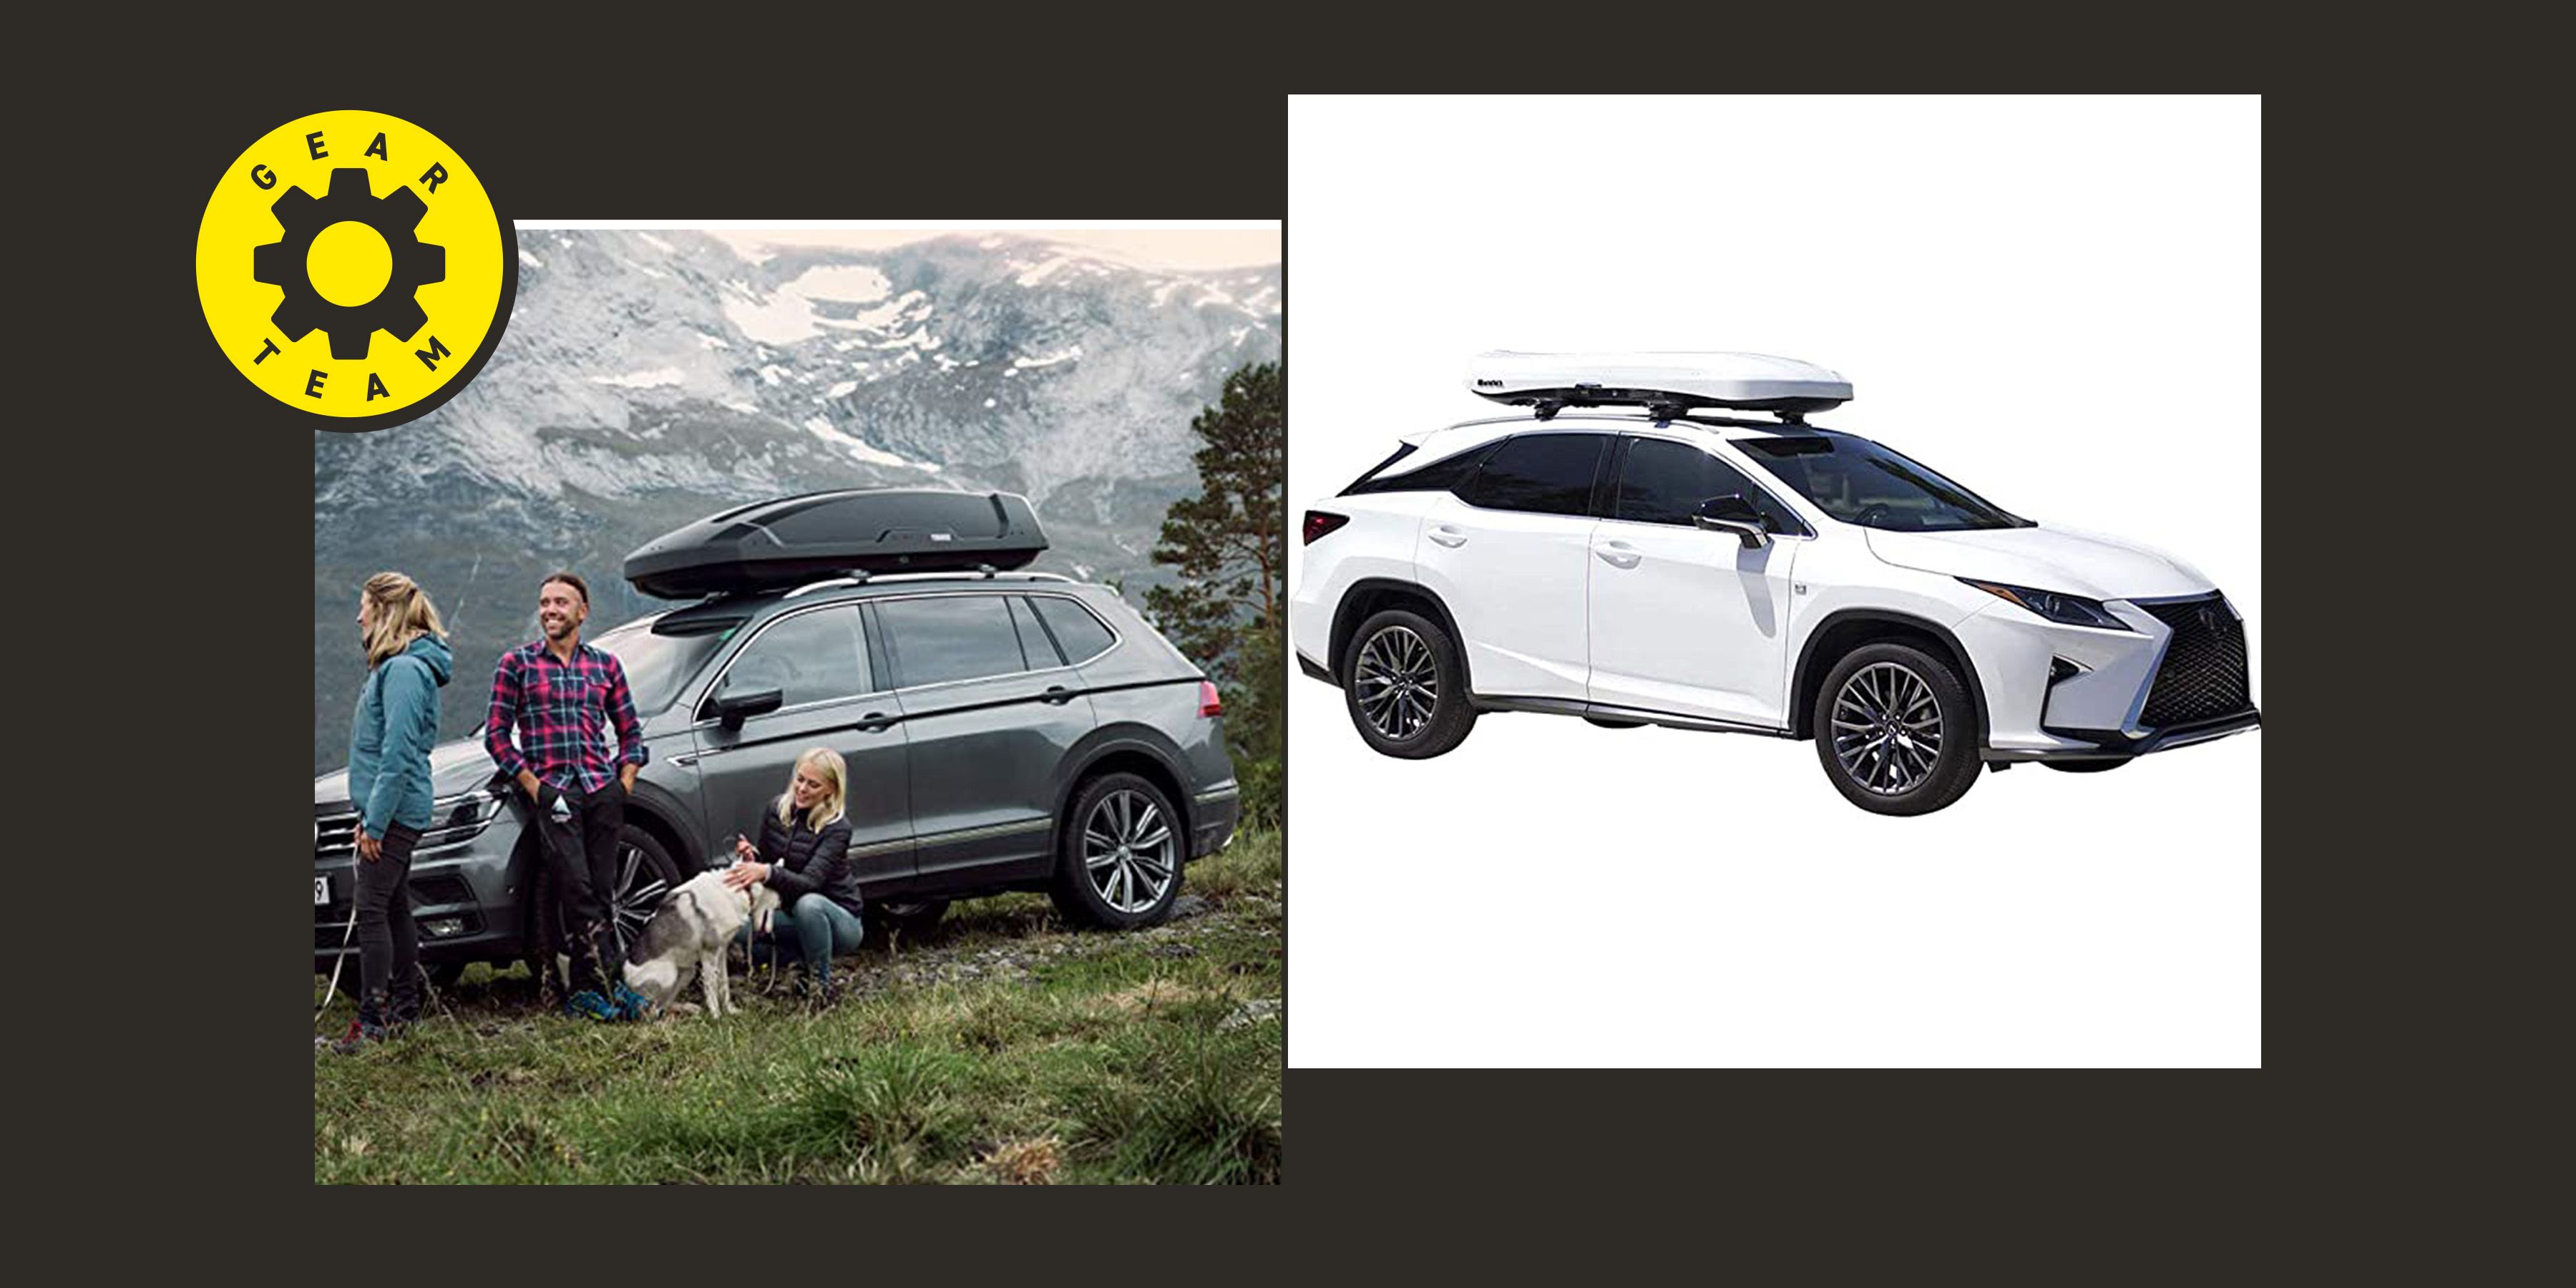 The Best Car Roof Carriers for Every Road Trip of 2024, Tested and Reviewed